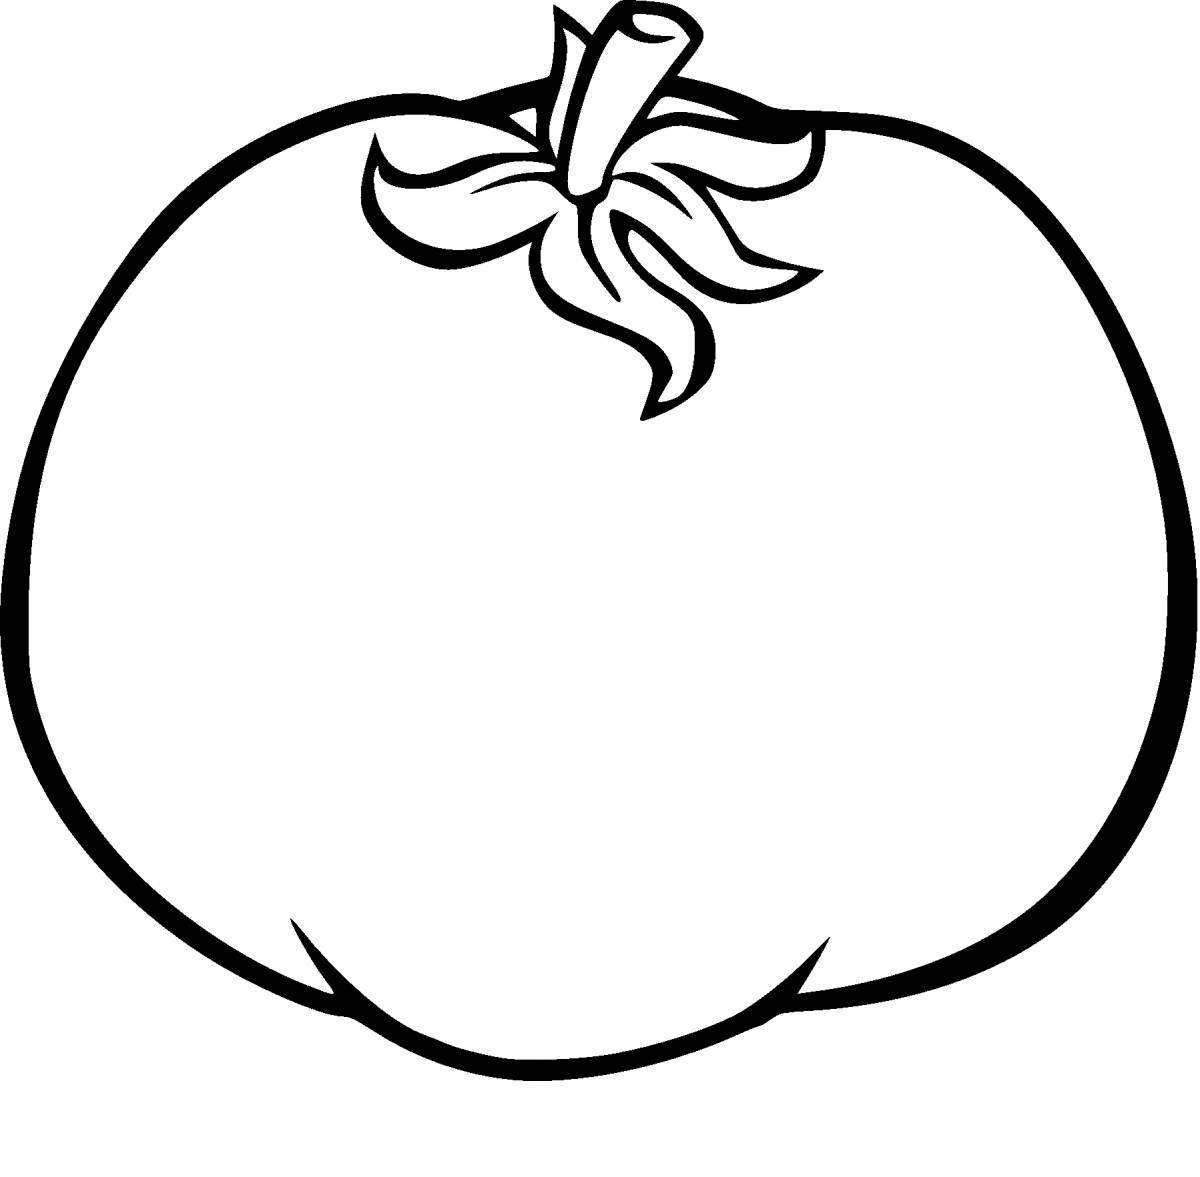 Coloring pages of tomatoes with an explosion of colors for children 2-3 years old